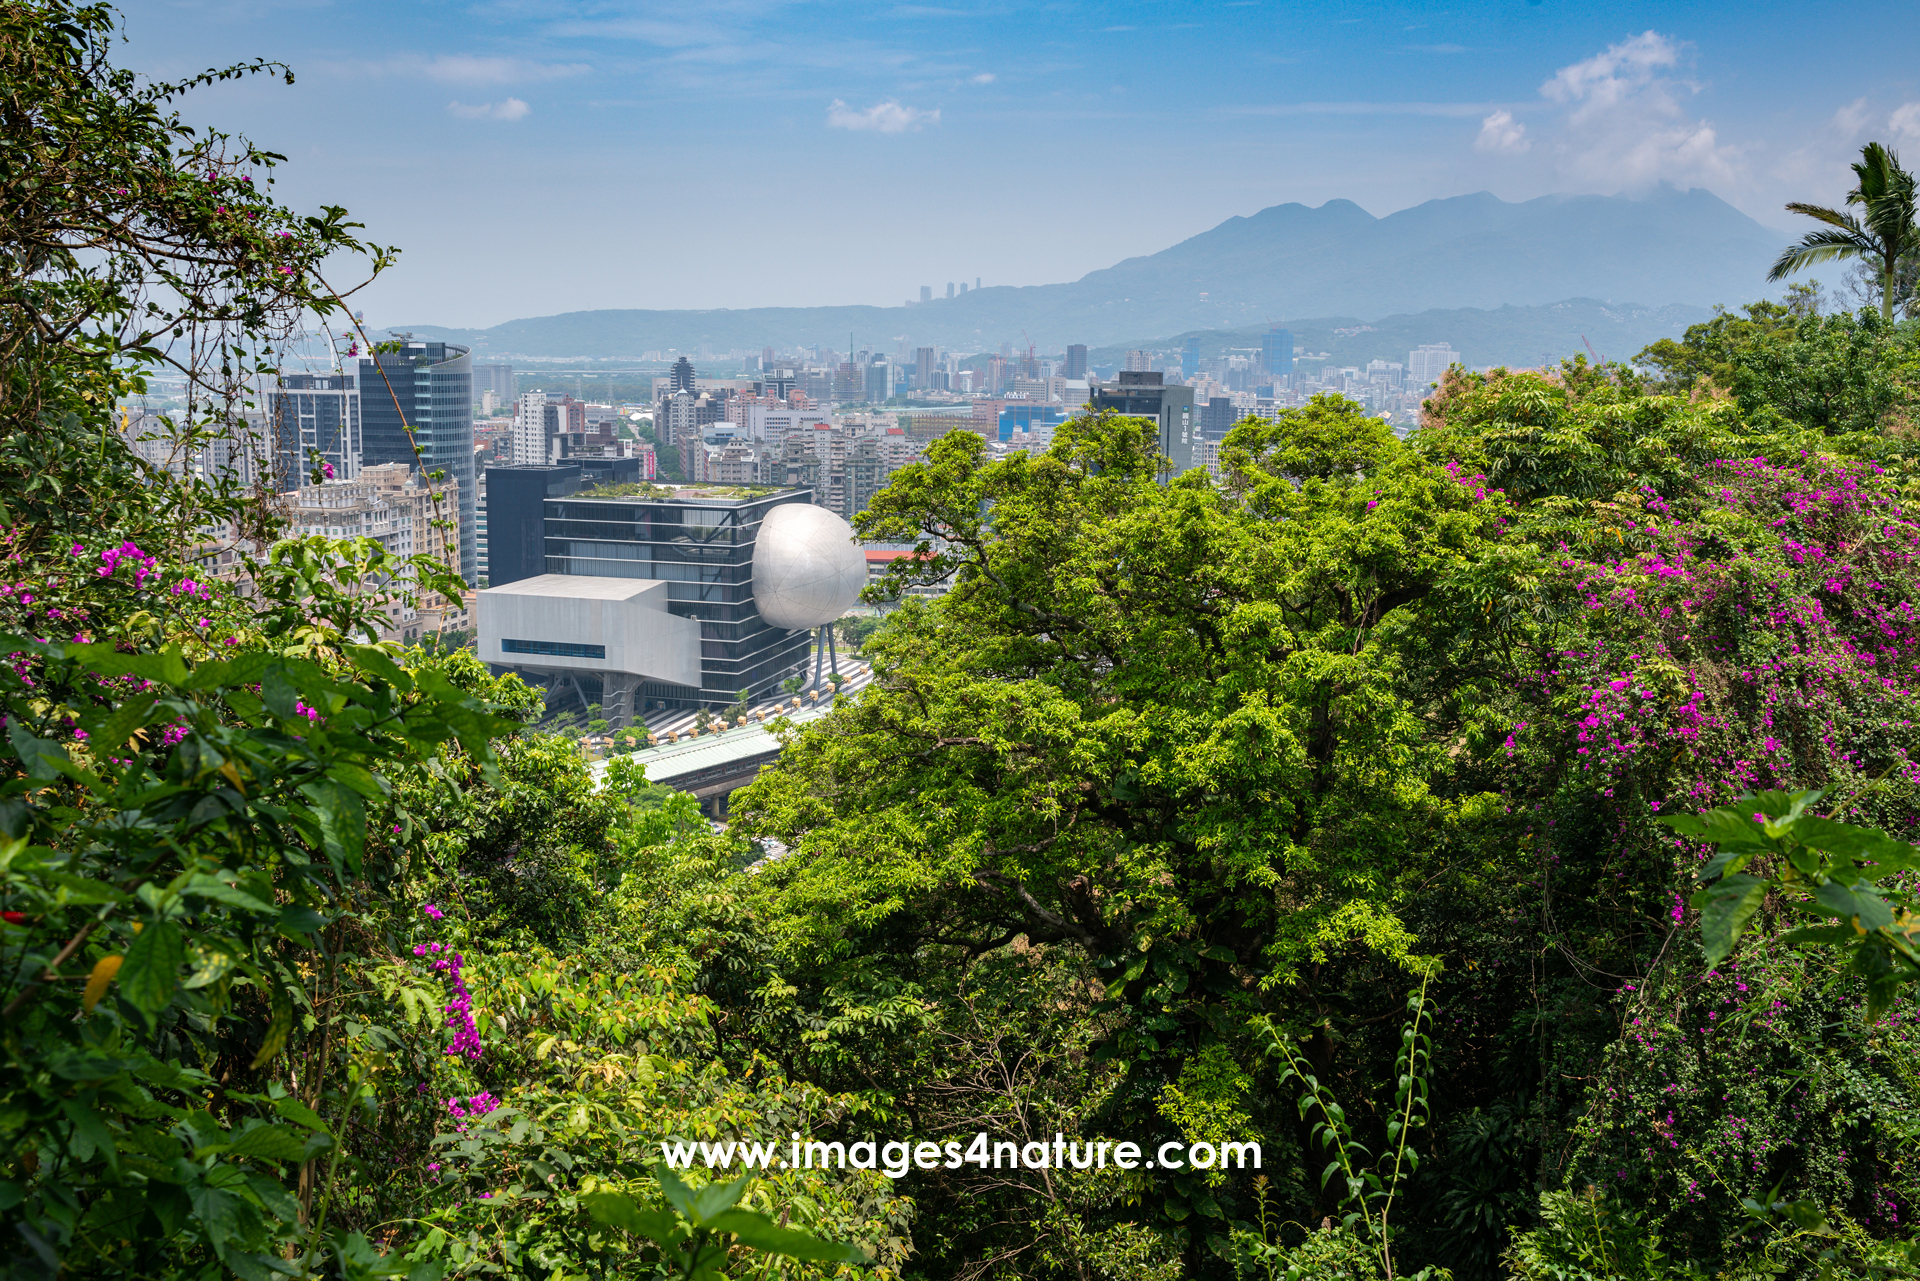 Scenic view of Taipei's Shilin District from a mountain hiking trail, with subtropical forest in the foreground